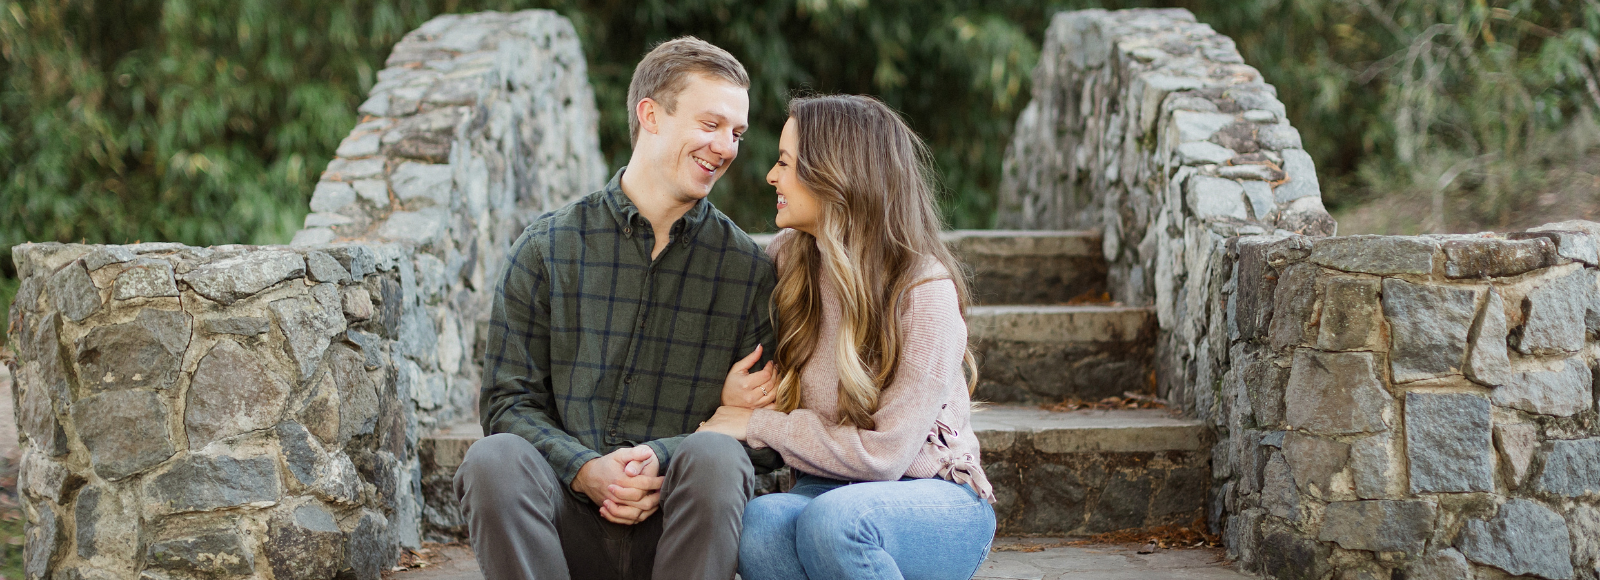 The Wedding Website of Victoria Stinson and Tanner Shaddox